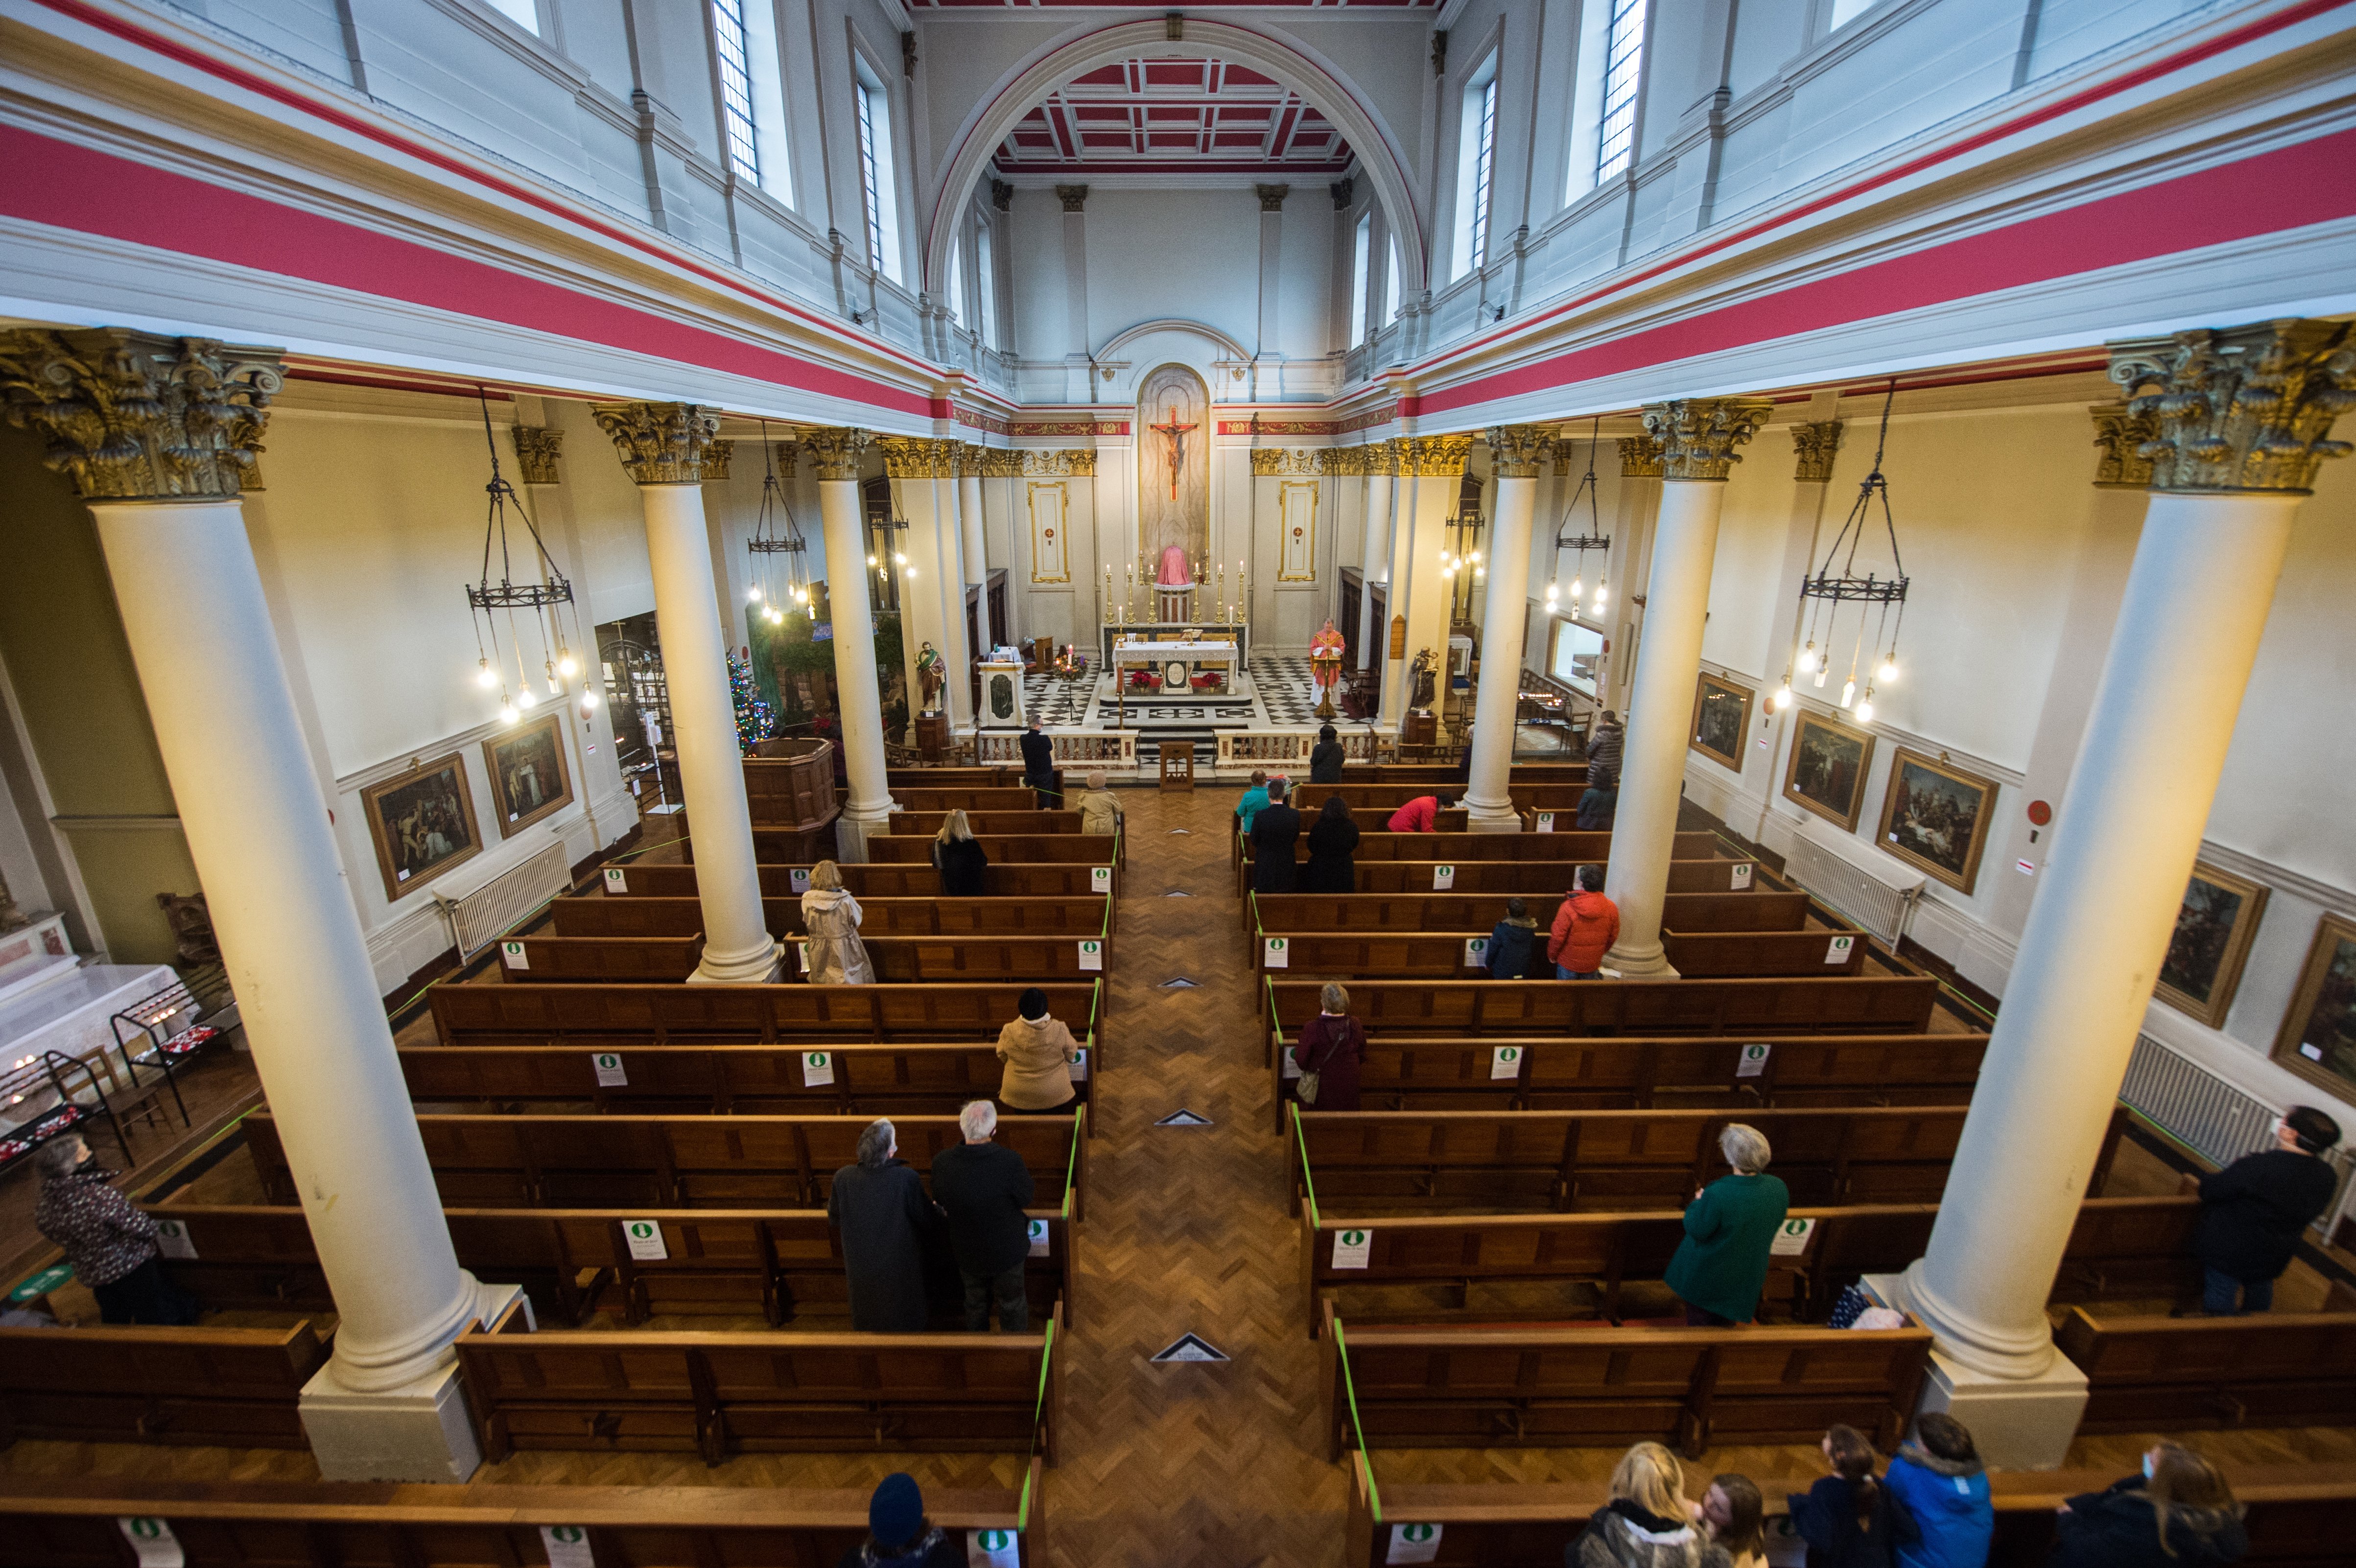 People maintain social distancing while attending Mass in the Church of Our Lady of Grace & St. Edward in London Dec. 13, 2020. (CNS photo/Marcin Mazur, courtesy Bishops' Conference of England and Wales)